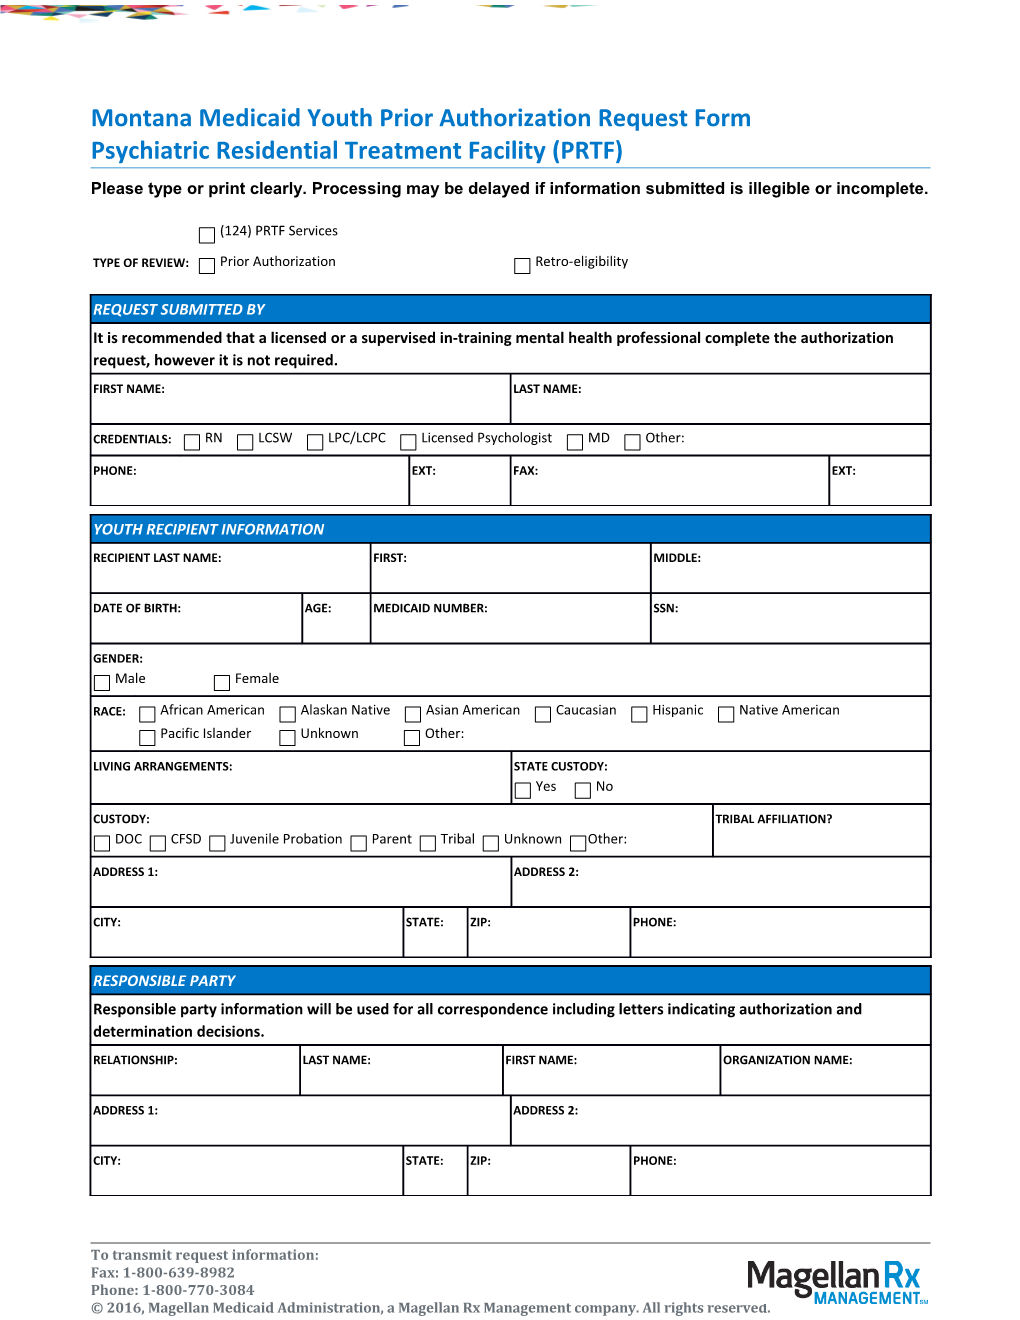 Montana Medicaid Youth Prior Authorization Request Form Psychiatric Residential Treatment